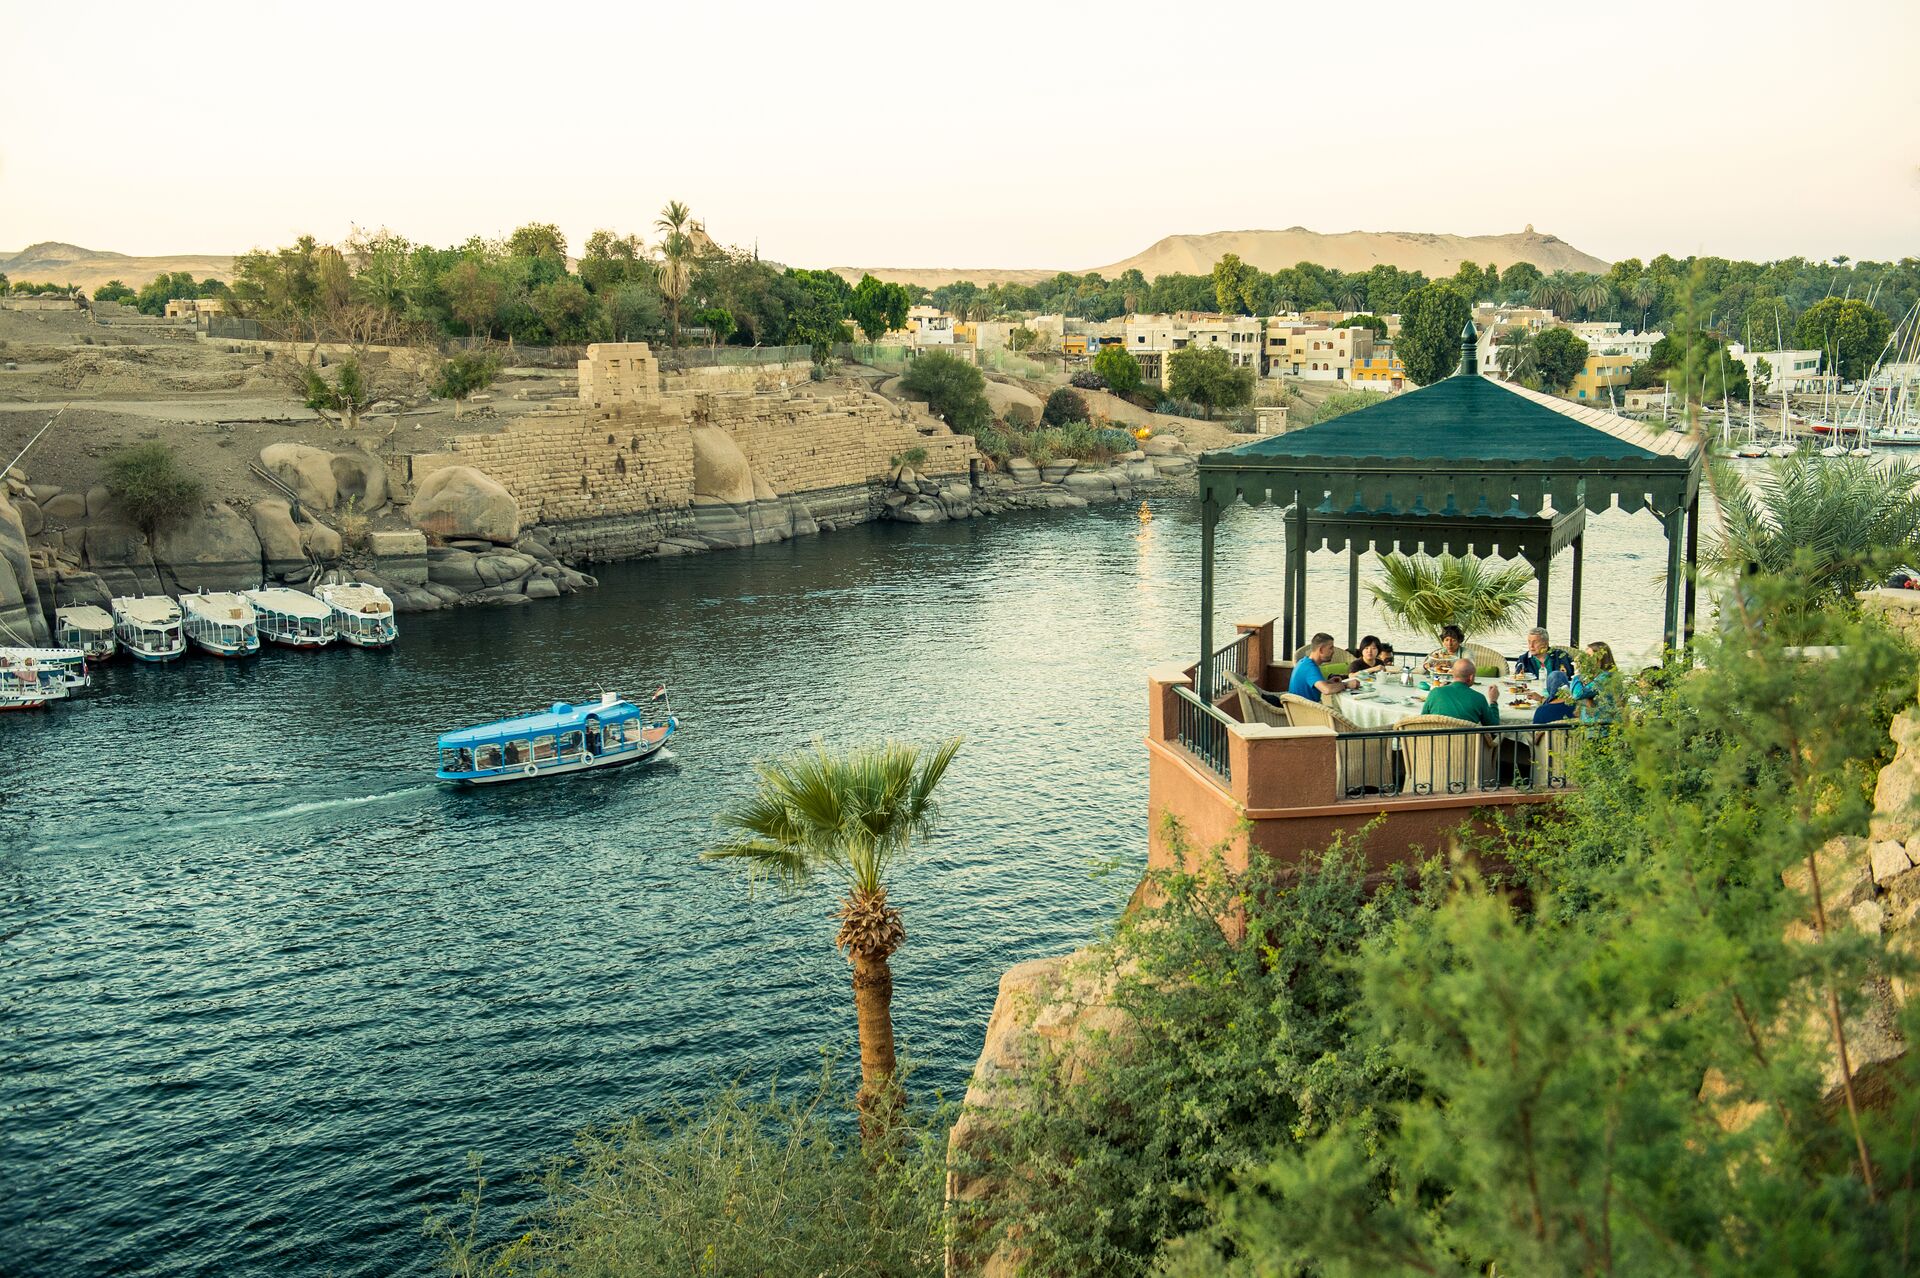 Image showing the view of the river Nile from the Old cataract Hotel. Showing guests enjoying tea on a terrace beside the river, with a boat and archeological ruins in the background.